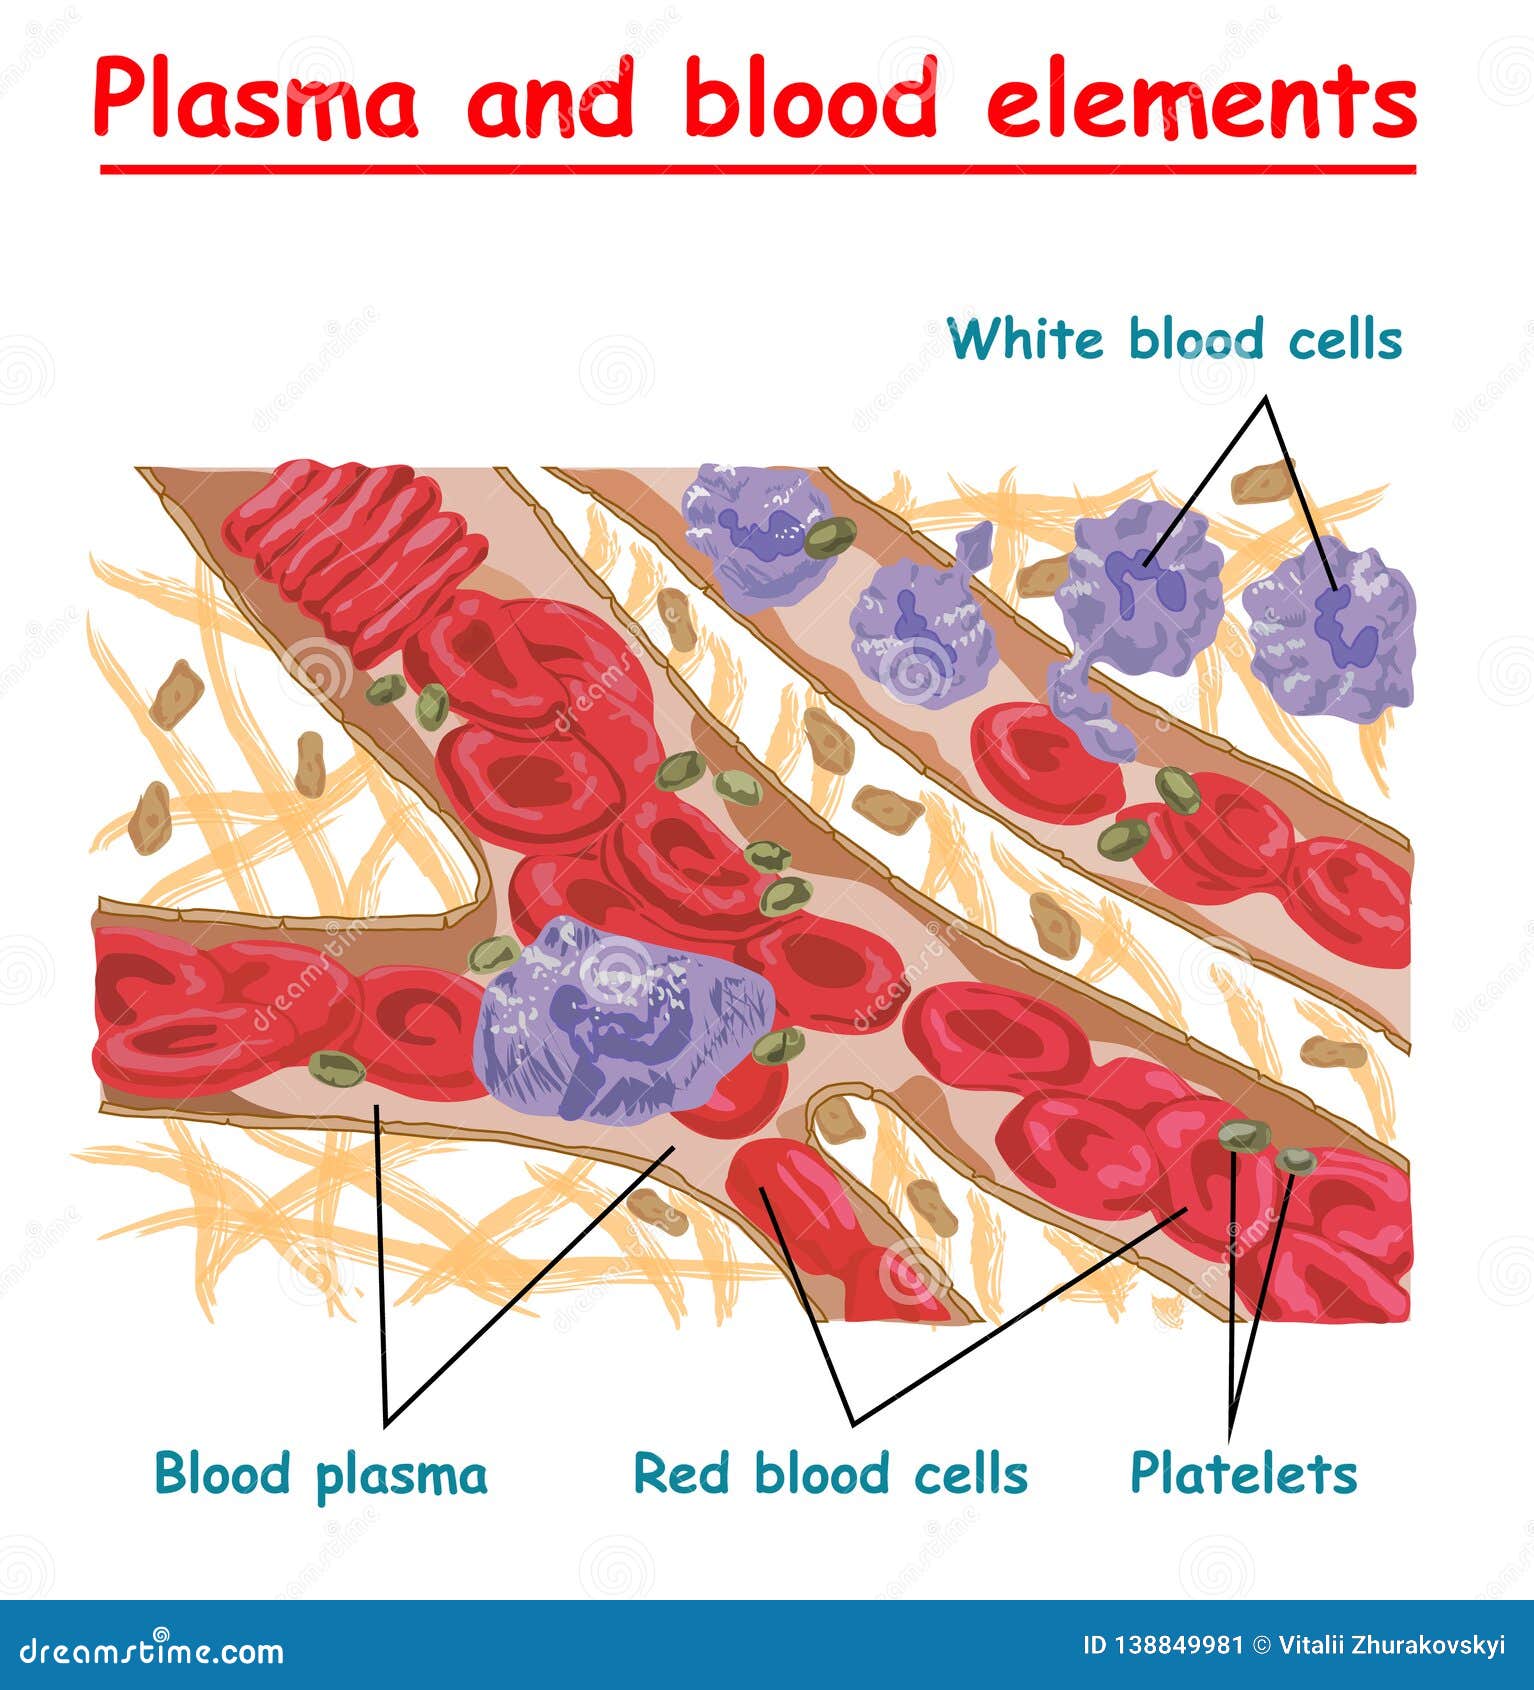 plasma of blood and white blood cells, red blood cells, platelets. plasma   info graphic. different s of huma